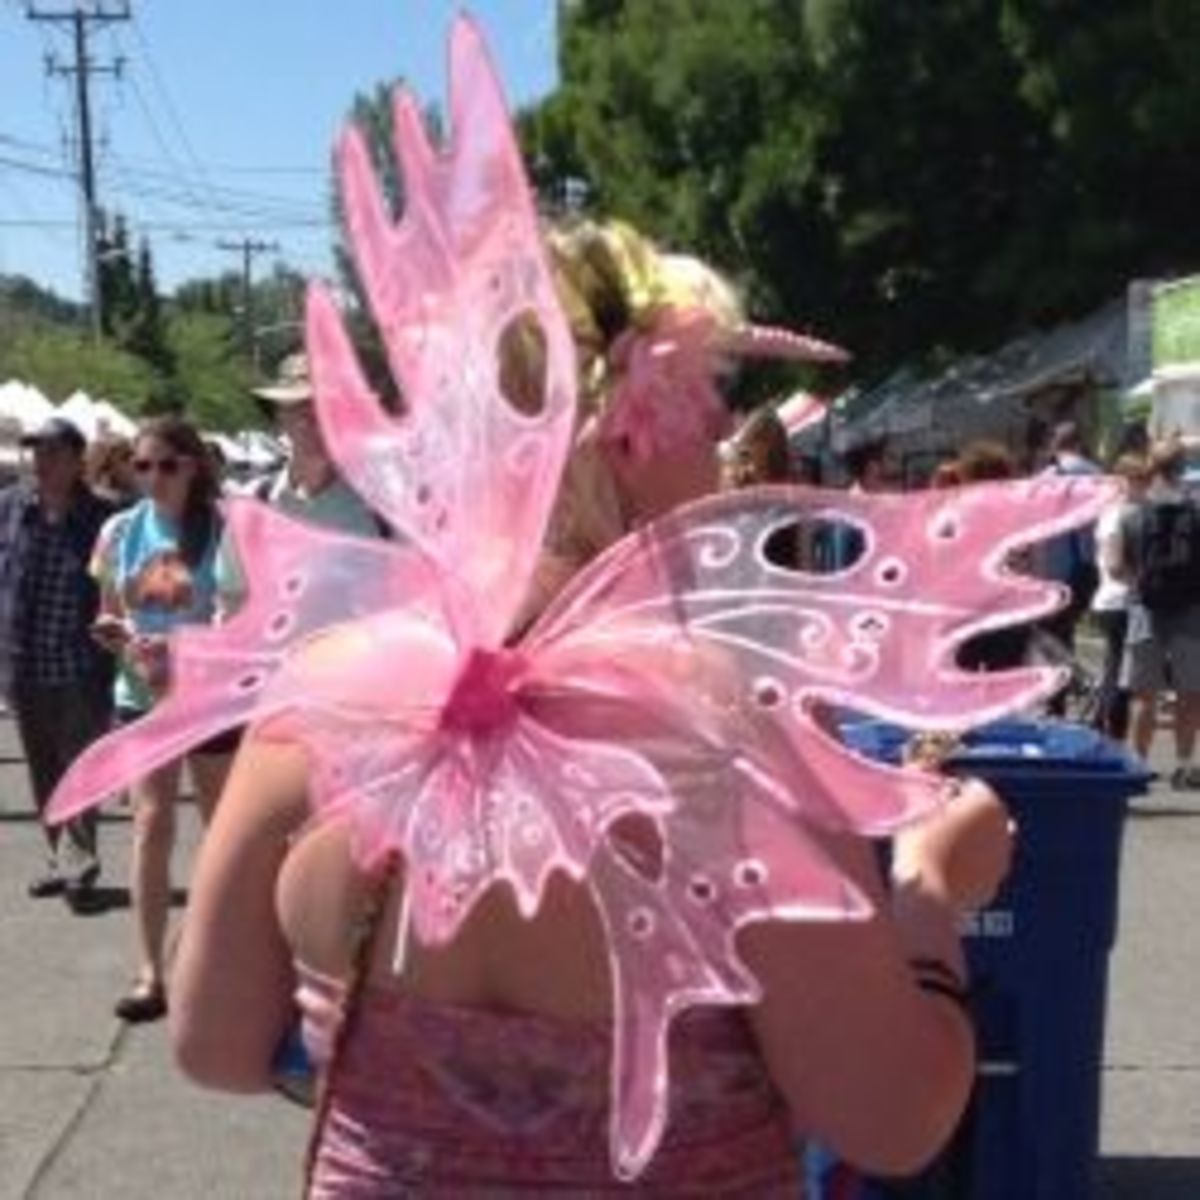 These pink wings have elaborate shapes and a few cut-outs.